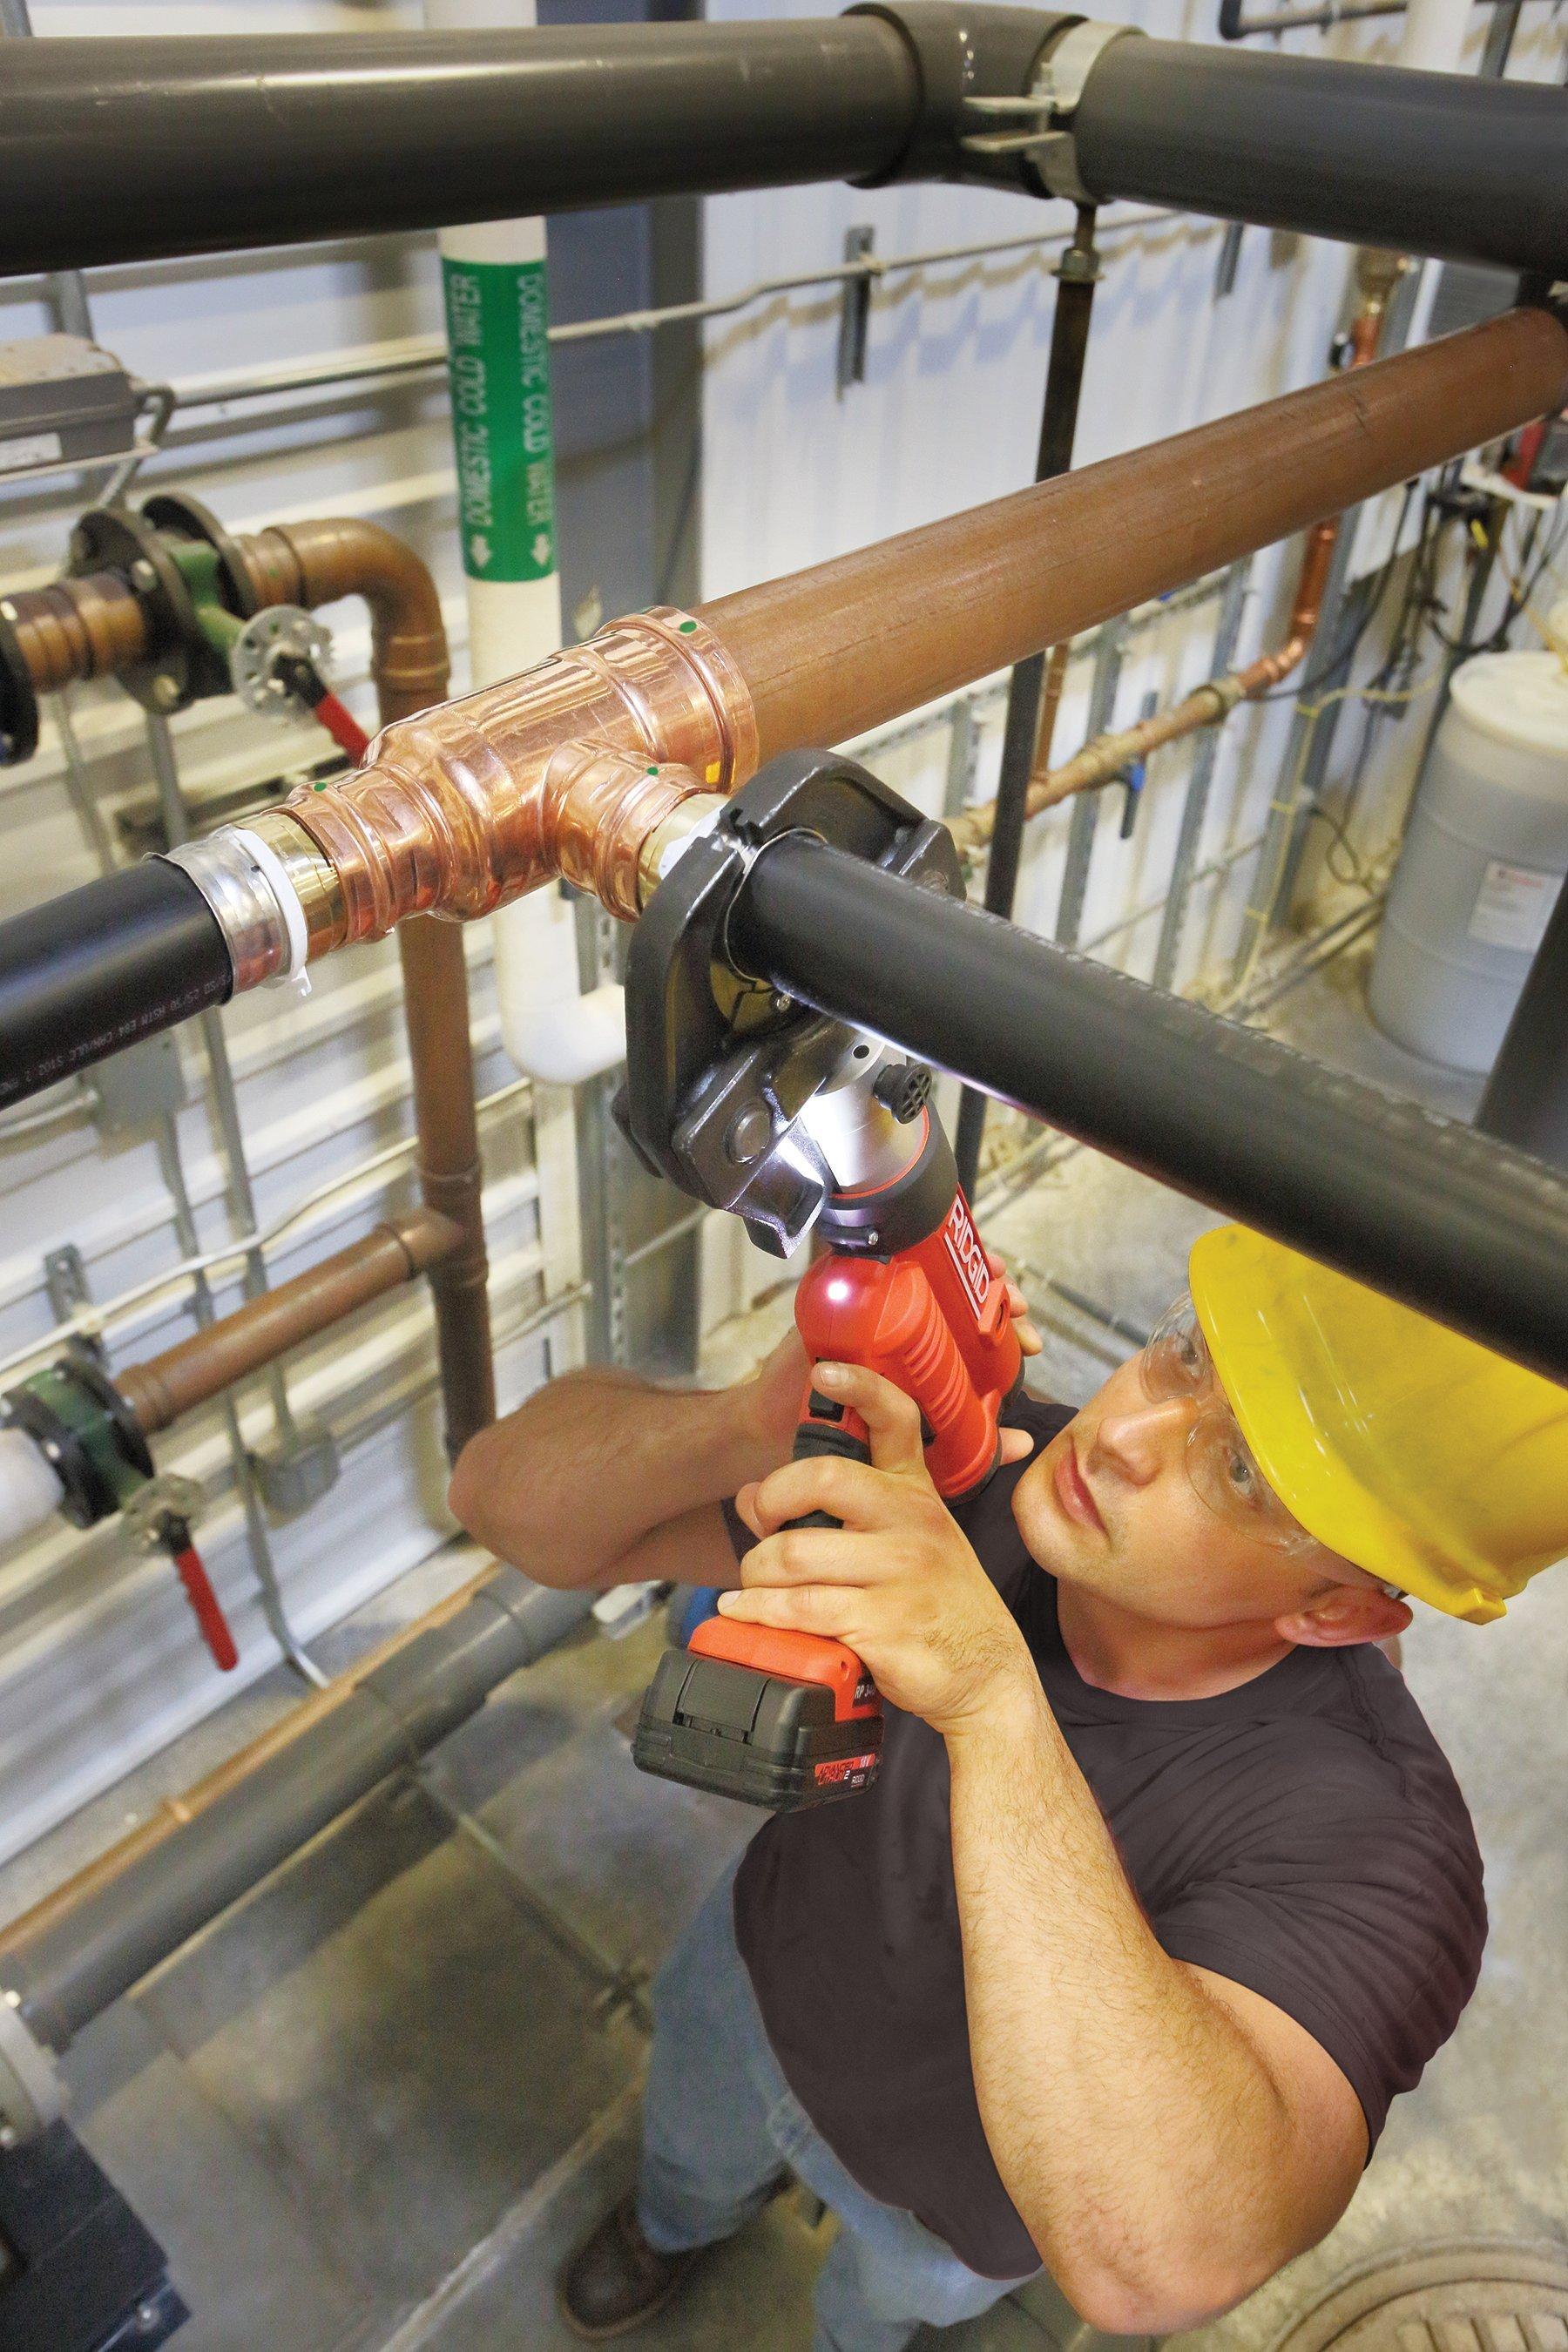 A contractor uses a press tool to connect overhead pipe fittings.